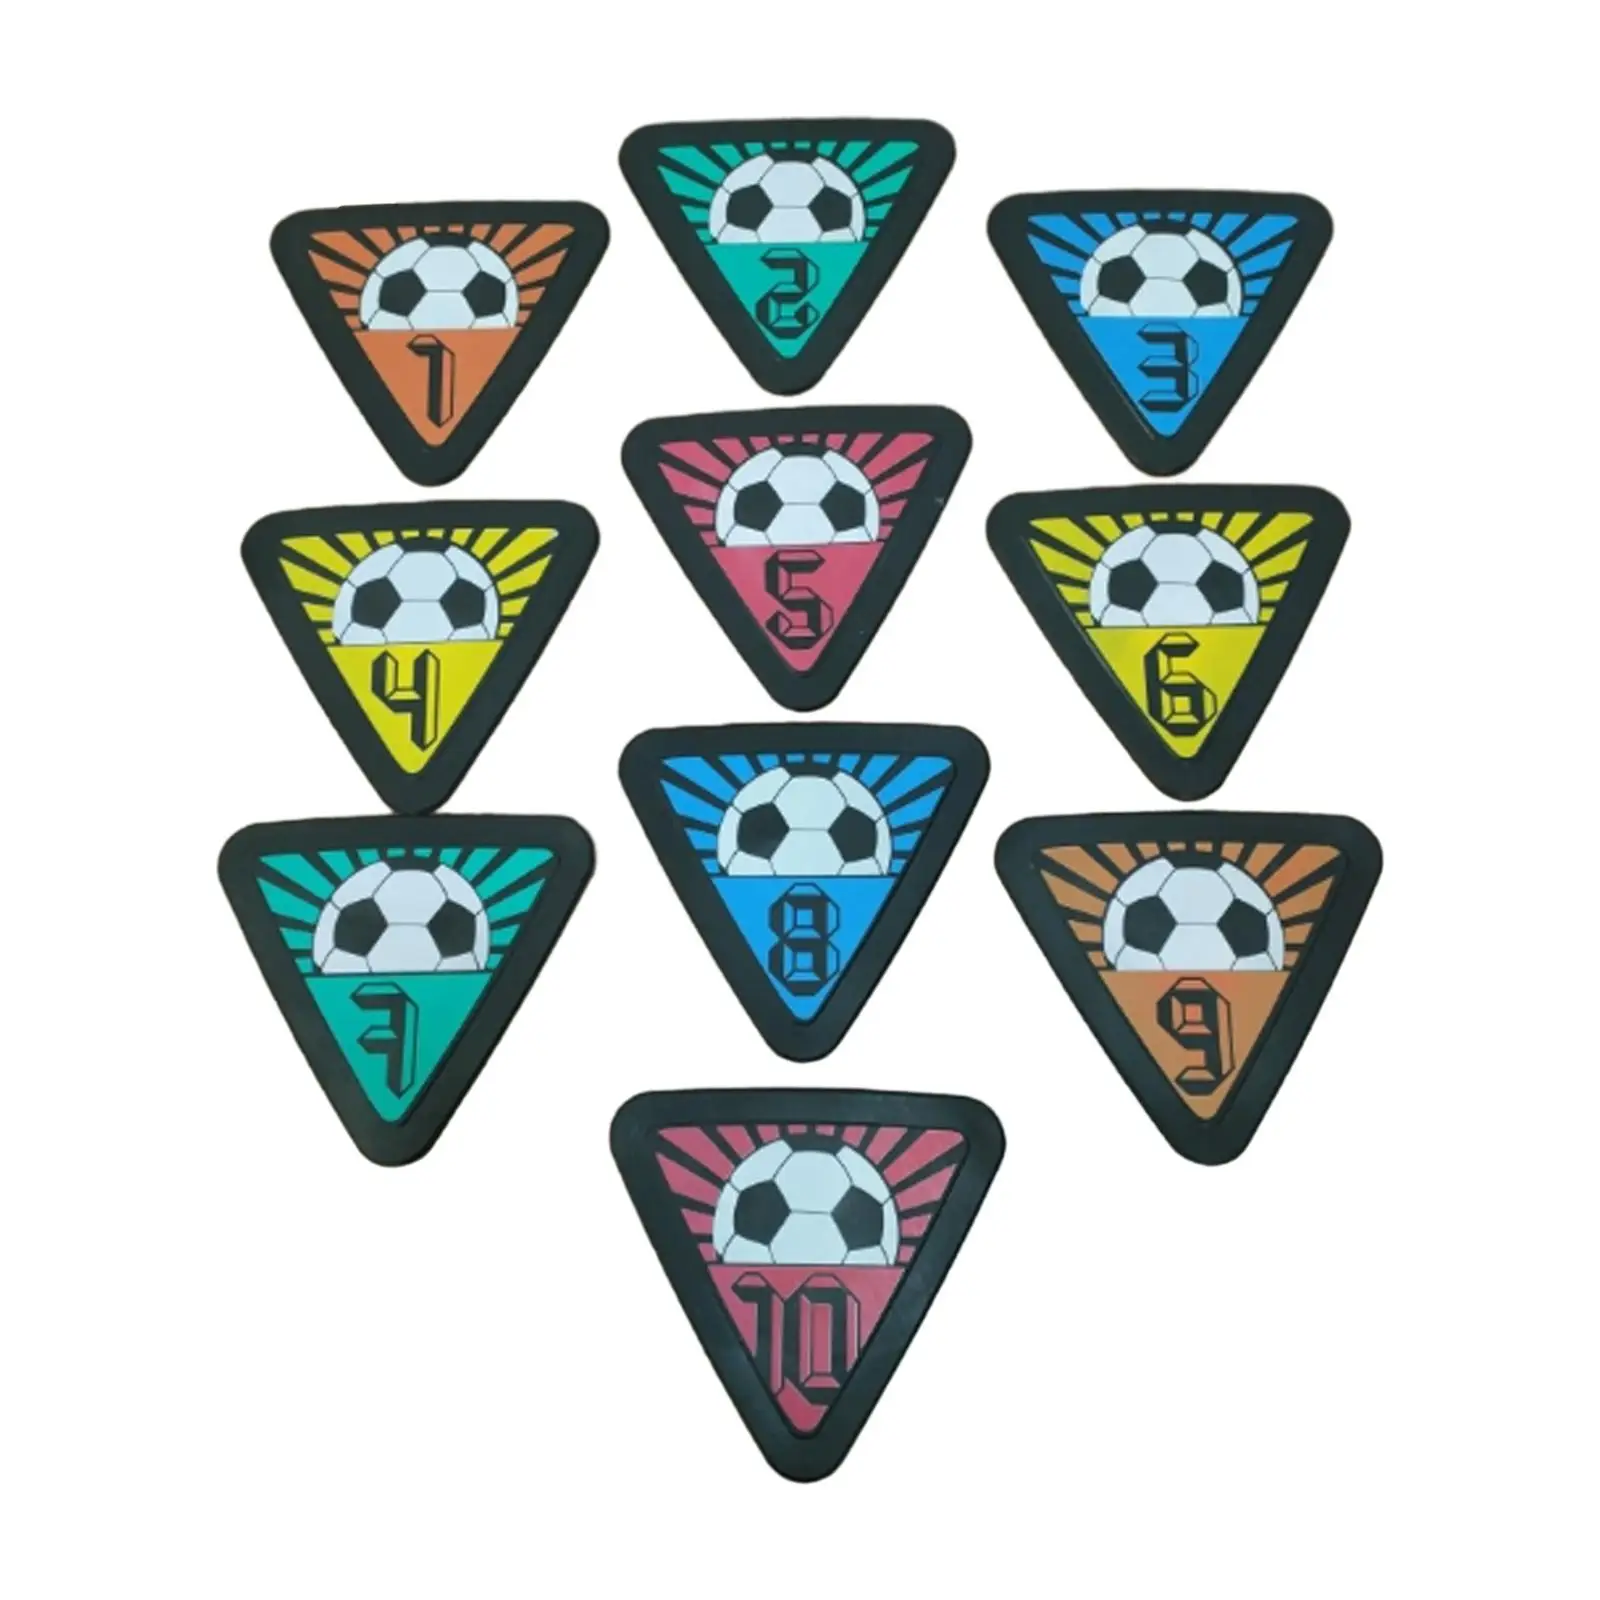 10Pcs Numbered Floor Spot Markers Practice Training Mark Pad for Activities Improve Speed Agility Sports Exercise Classroom